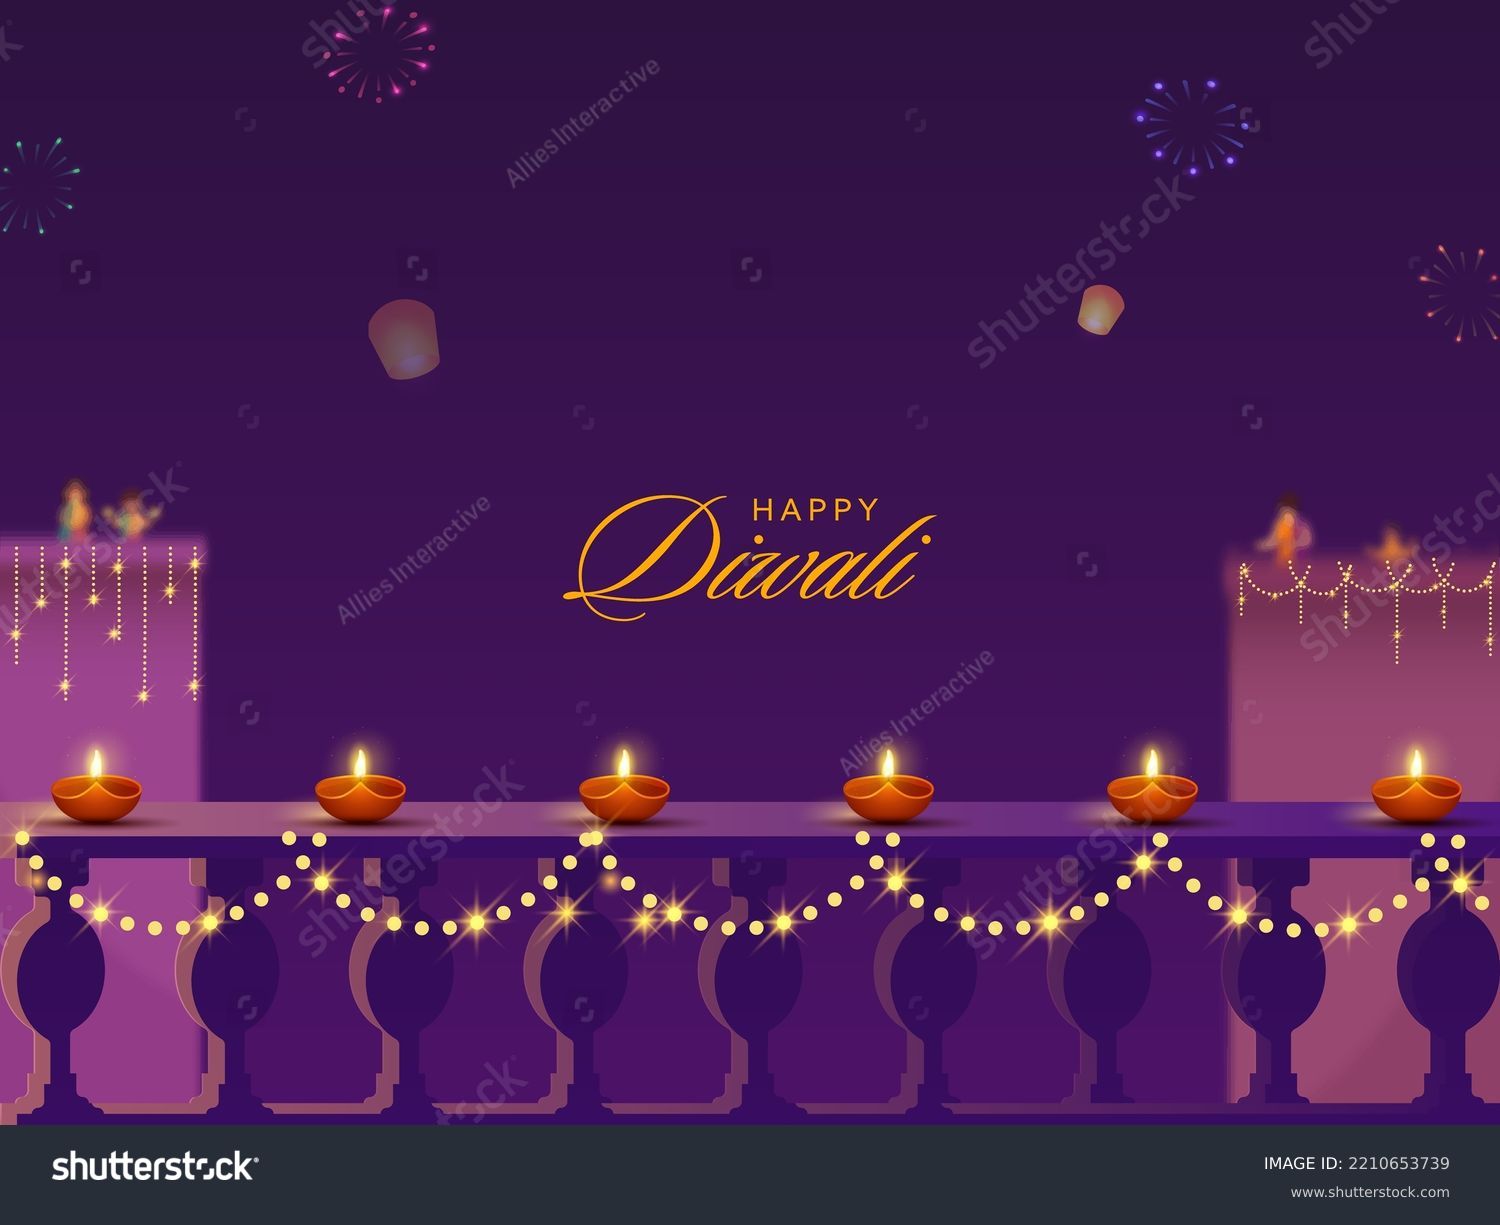 Diwali Celebration Background Decorated With Lit Oil Lamps (Diya), Lighting Garland, Sky Balloons And Buildings.  #2210653739